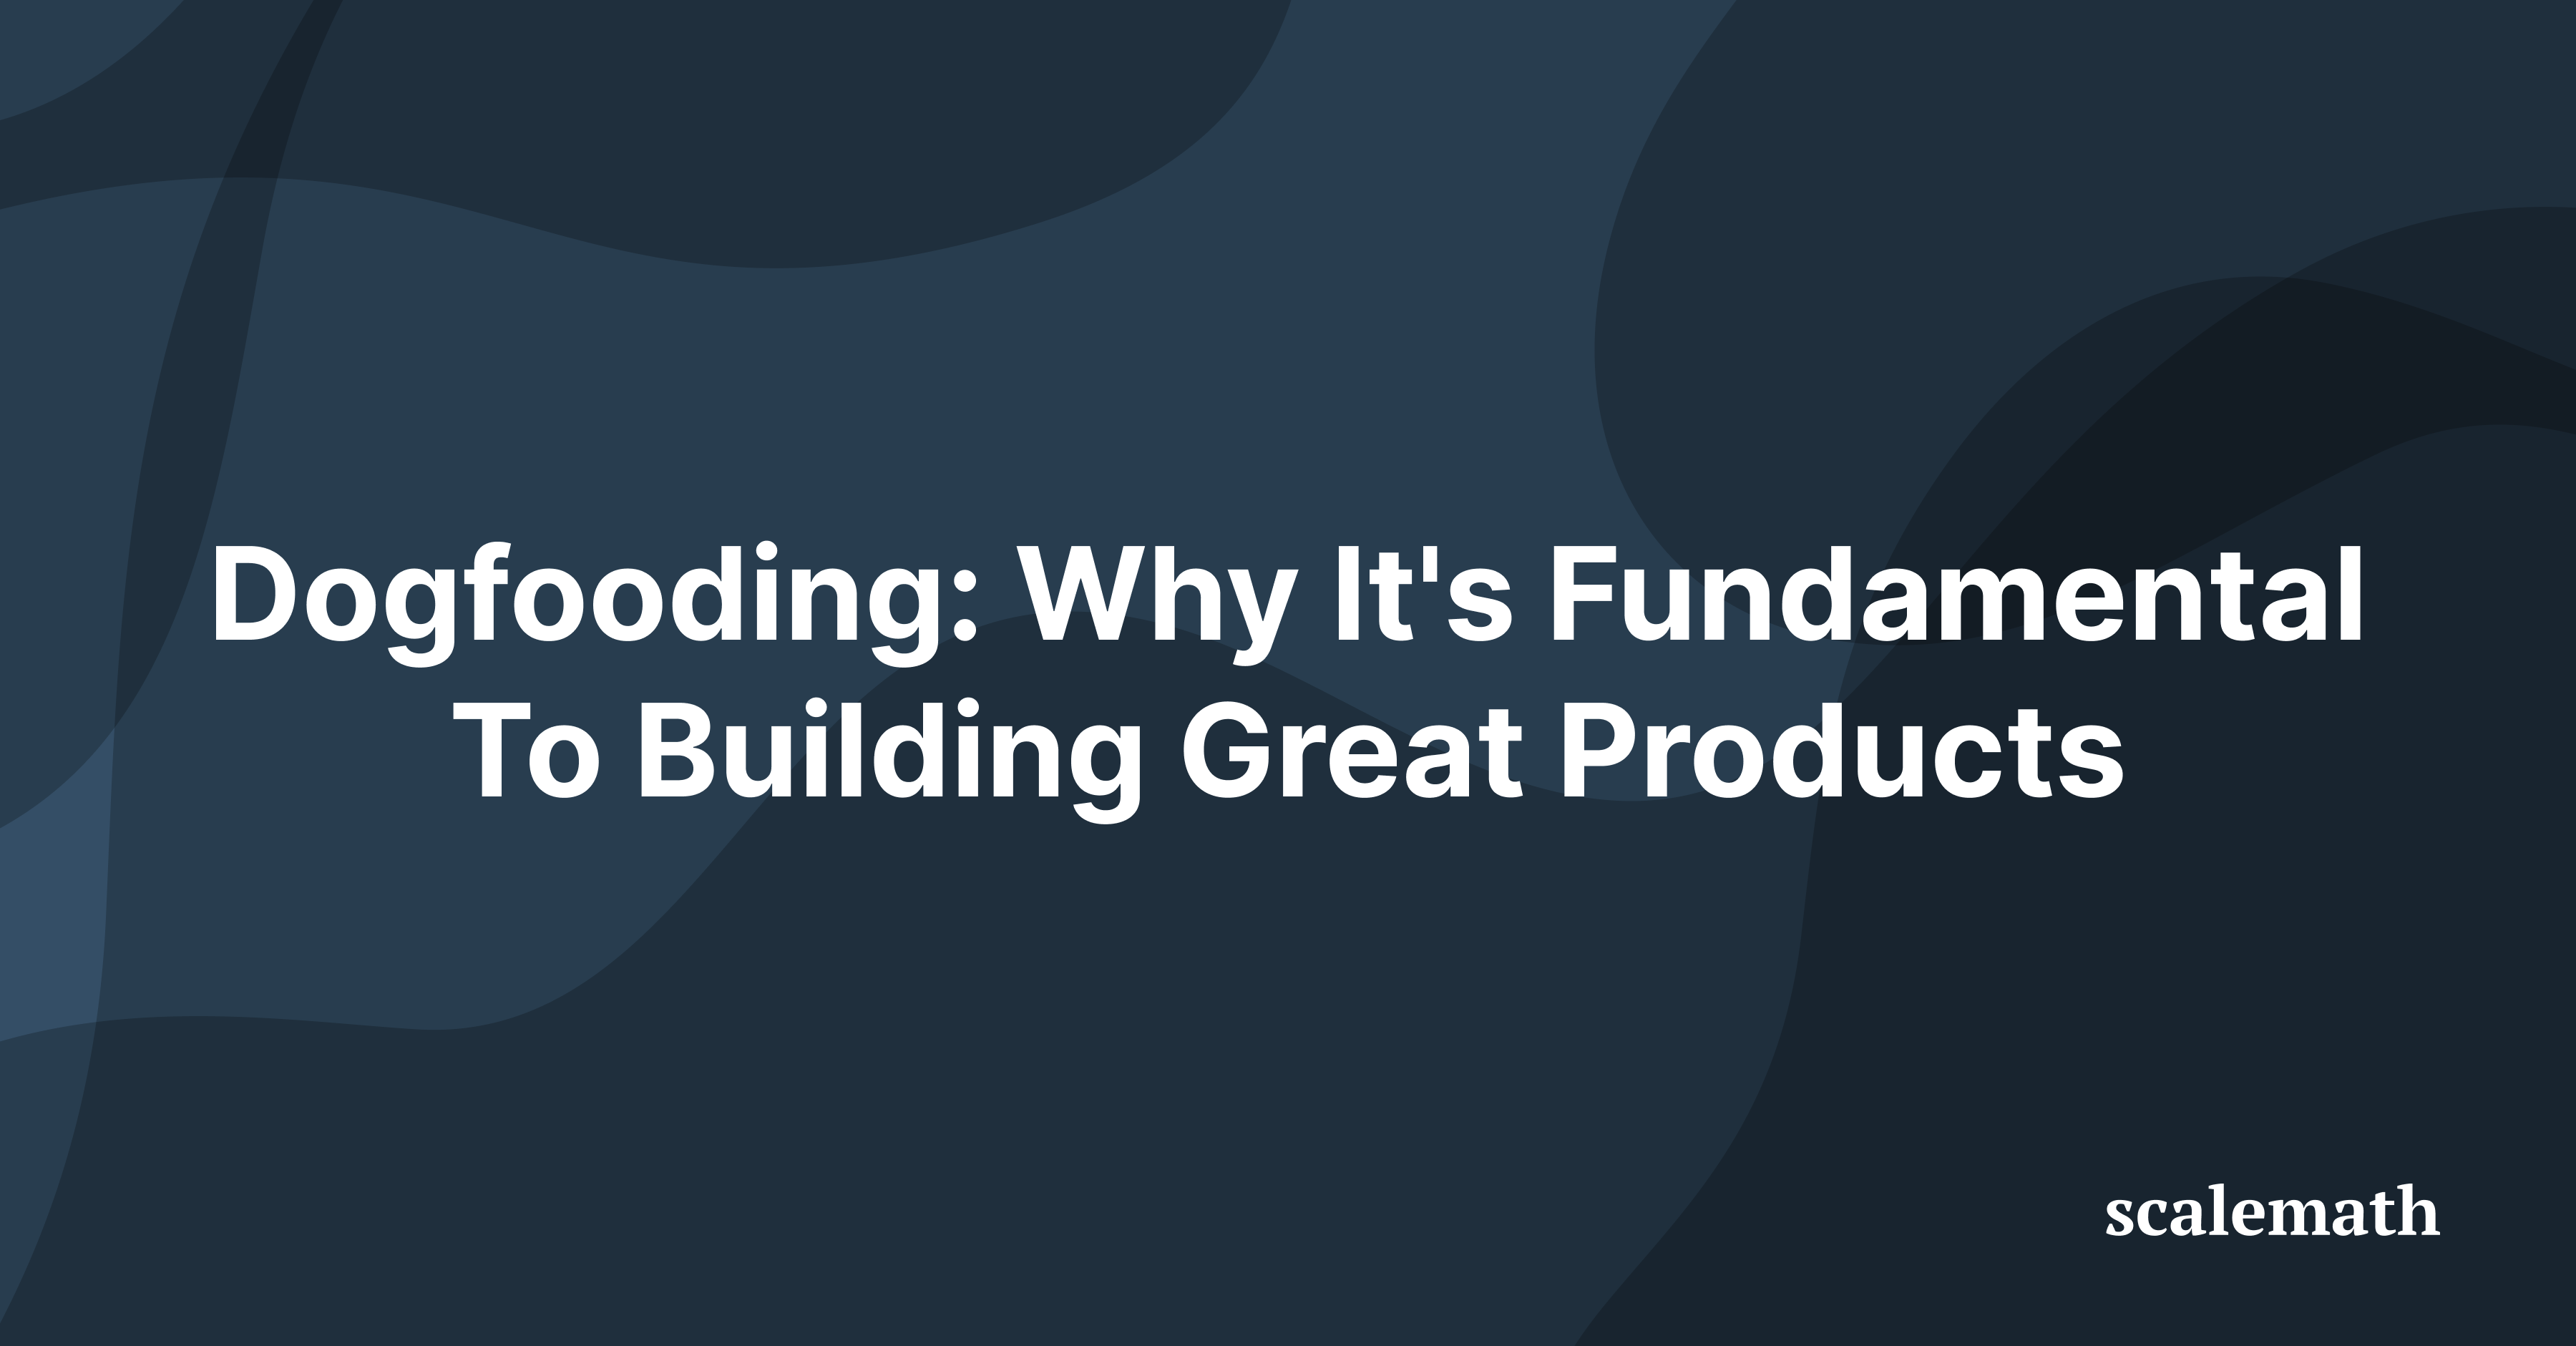 Dogfooding: Why It’s Fundamental To Building Great Products